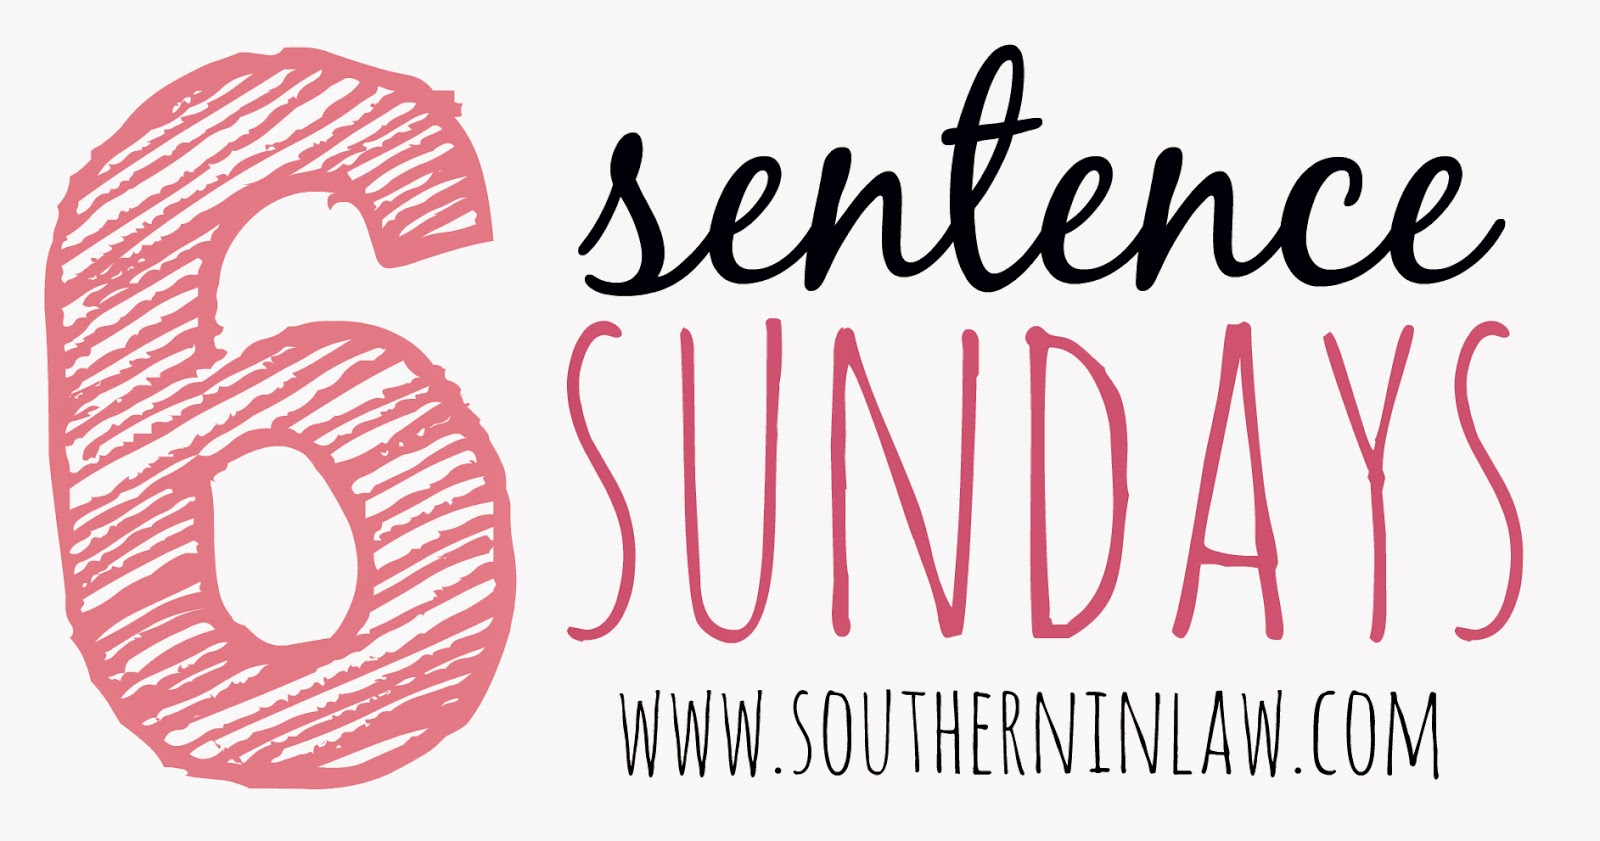 6 Sentence Sunday on Southern In-Law